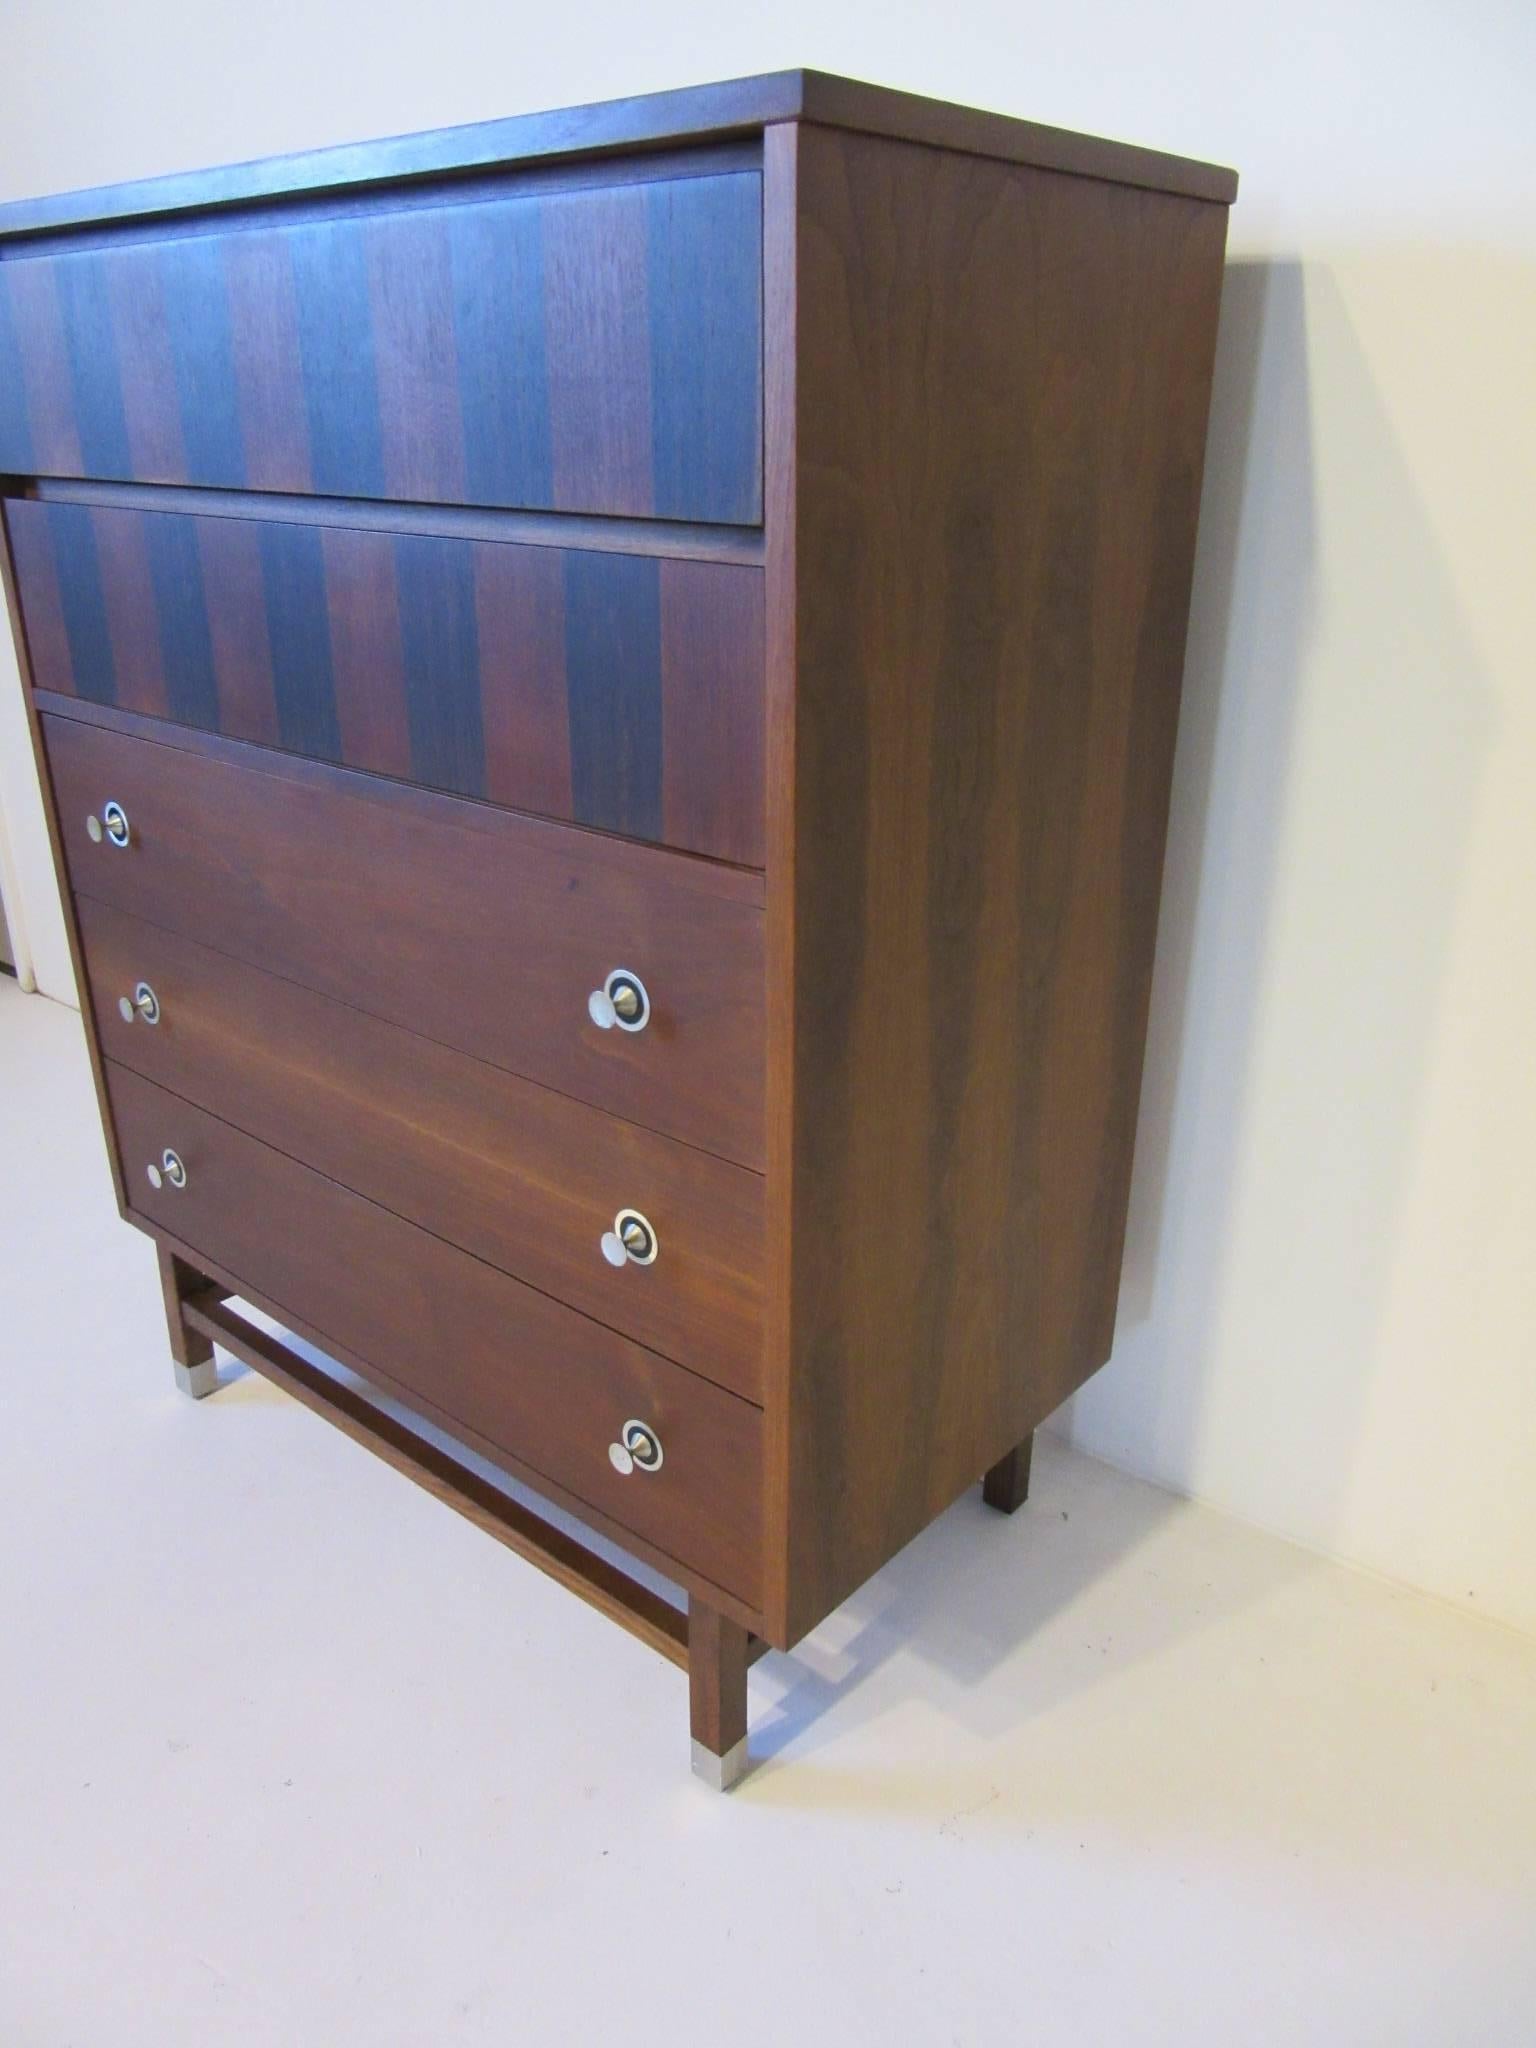 A dark walnut dresser chest with rosewood details, five drawers, aluminium turned pulls, one drawer with dividers and lower matching wood stretchers and aluminium capped legs. Manufactured by the Stanley Furniture company, their best and most